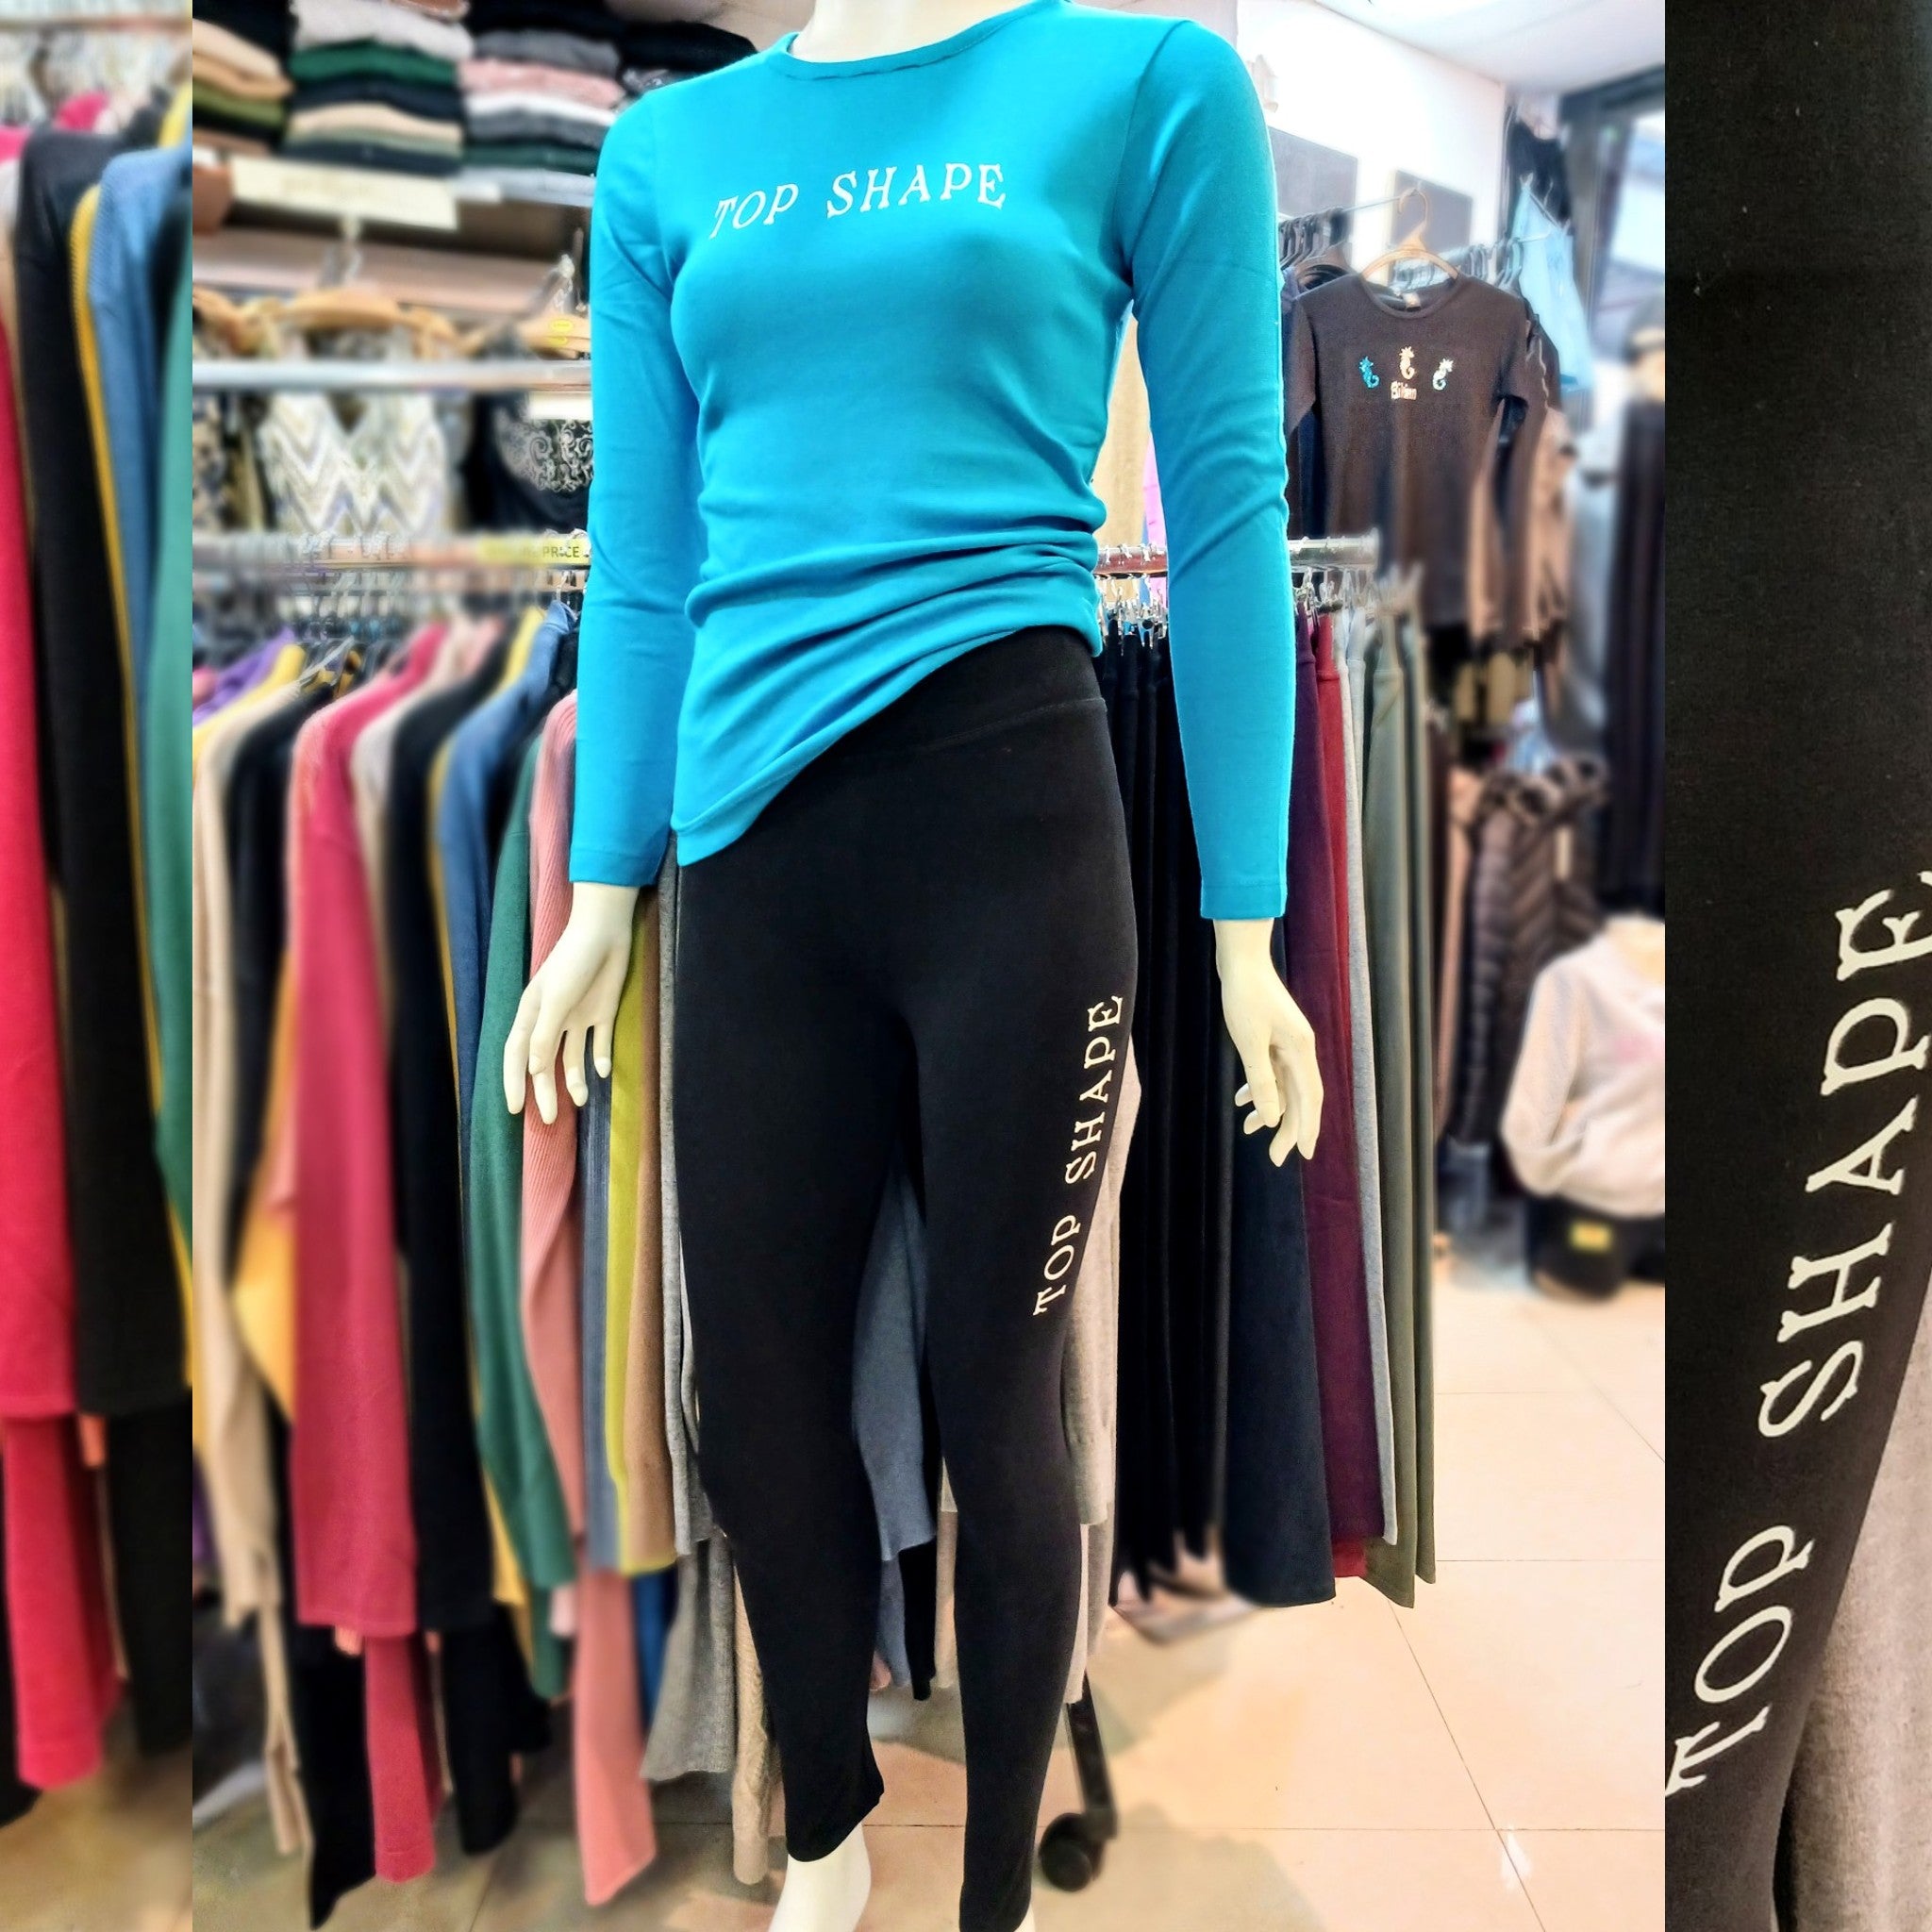 picture of a manequin in a store wearing a black leggings printed with a white logo on the thigh: Top Shape, and a long sleeves blue tee-shirt with the same logo on the front.  bikinn.com